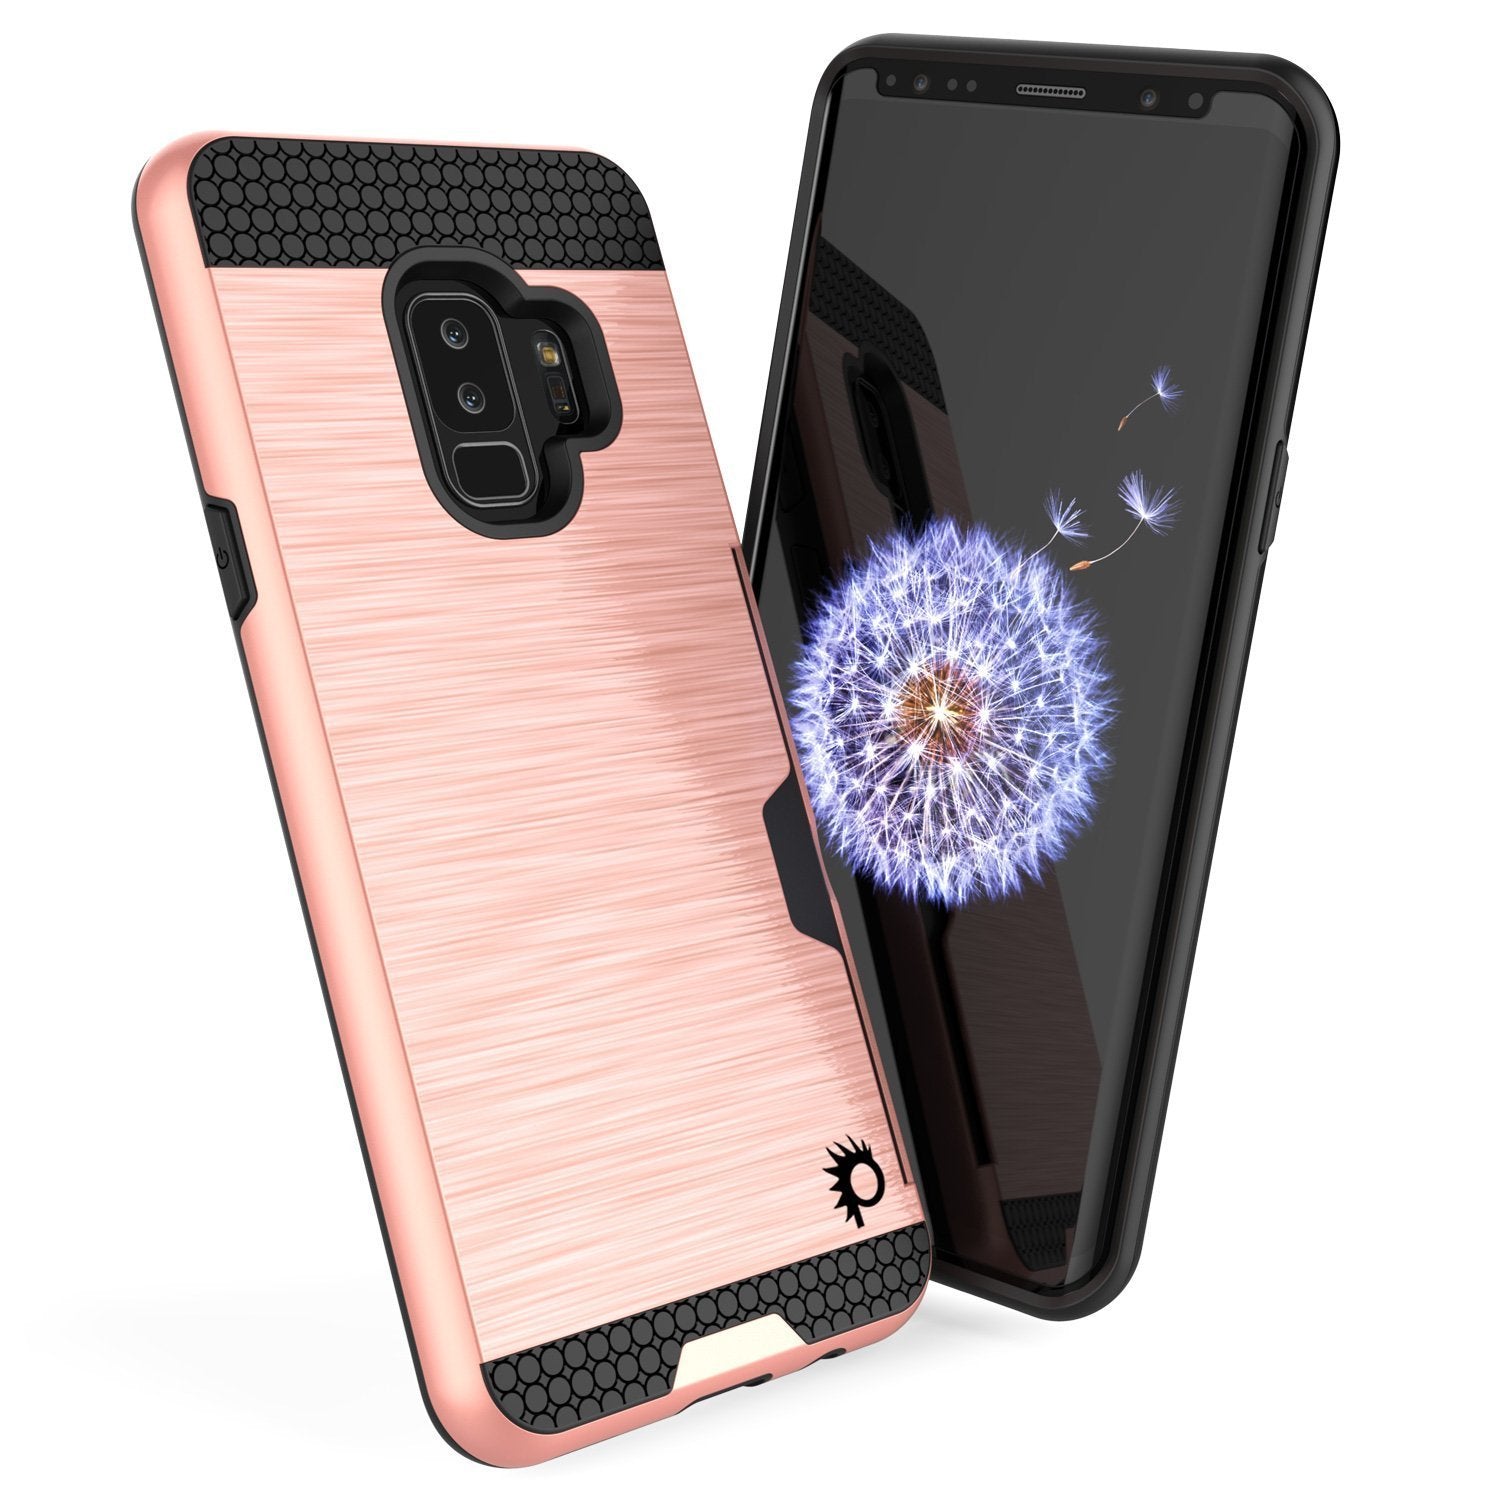 Galaxy S9 Plus Case, PUNKcase [SLOT Series] [Slim Fit] Dual-Layer Armor Cover w/Integrated Anti-Shock System, Credit Card Slot  [Rose Gold] - PunkCase NZ